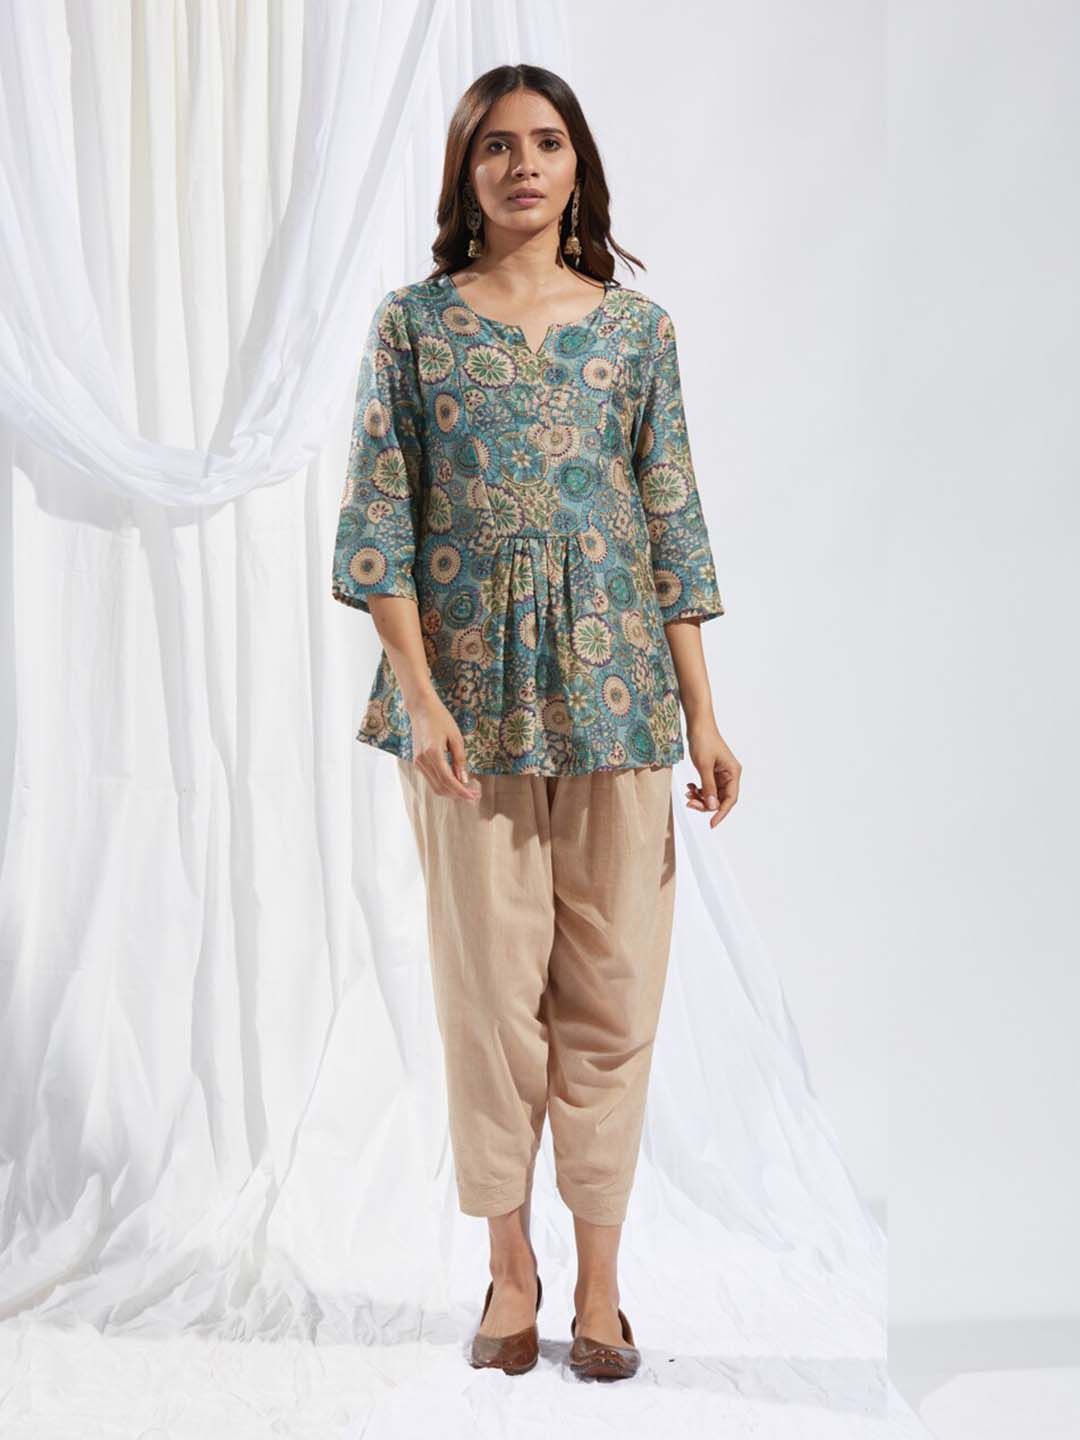 Fabindia Floral Printed Longline Top Price in India